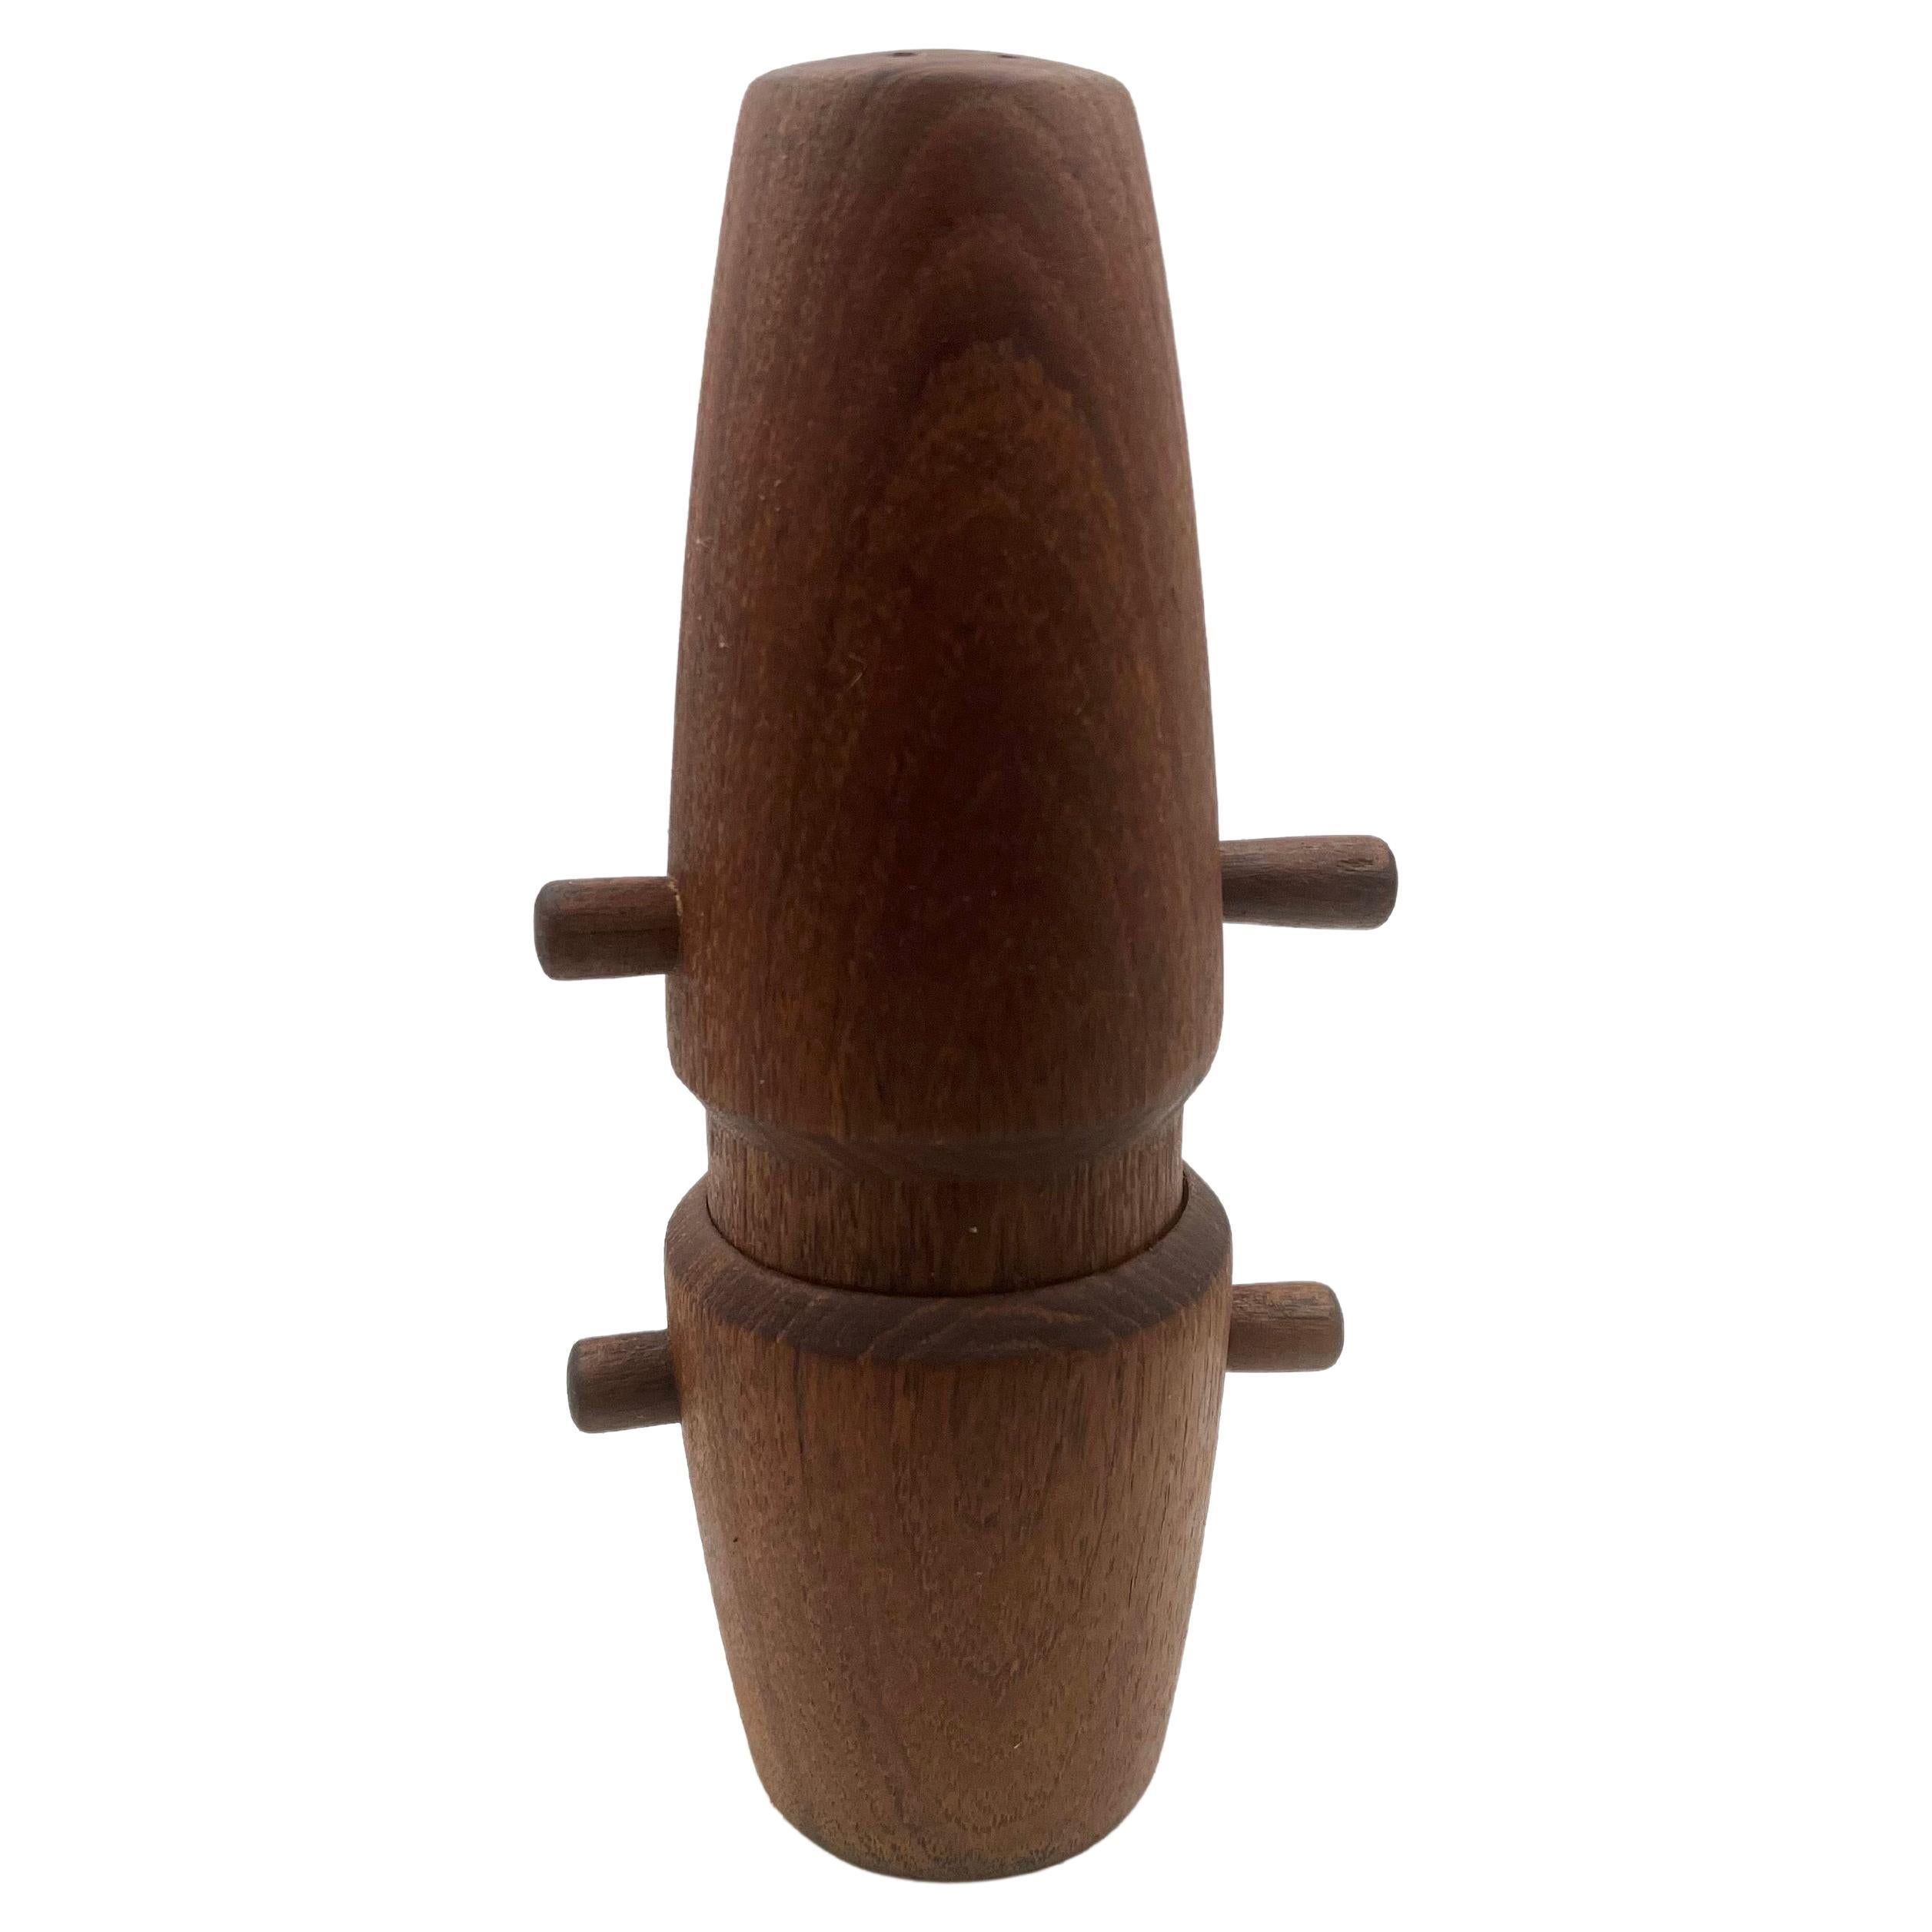 Early production on this solid teak salt and peppermill designed by Quistgaard for Dansk, a beautiful design. with removable wood plugs and Peugeot French metal movement.